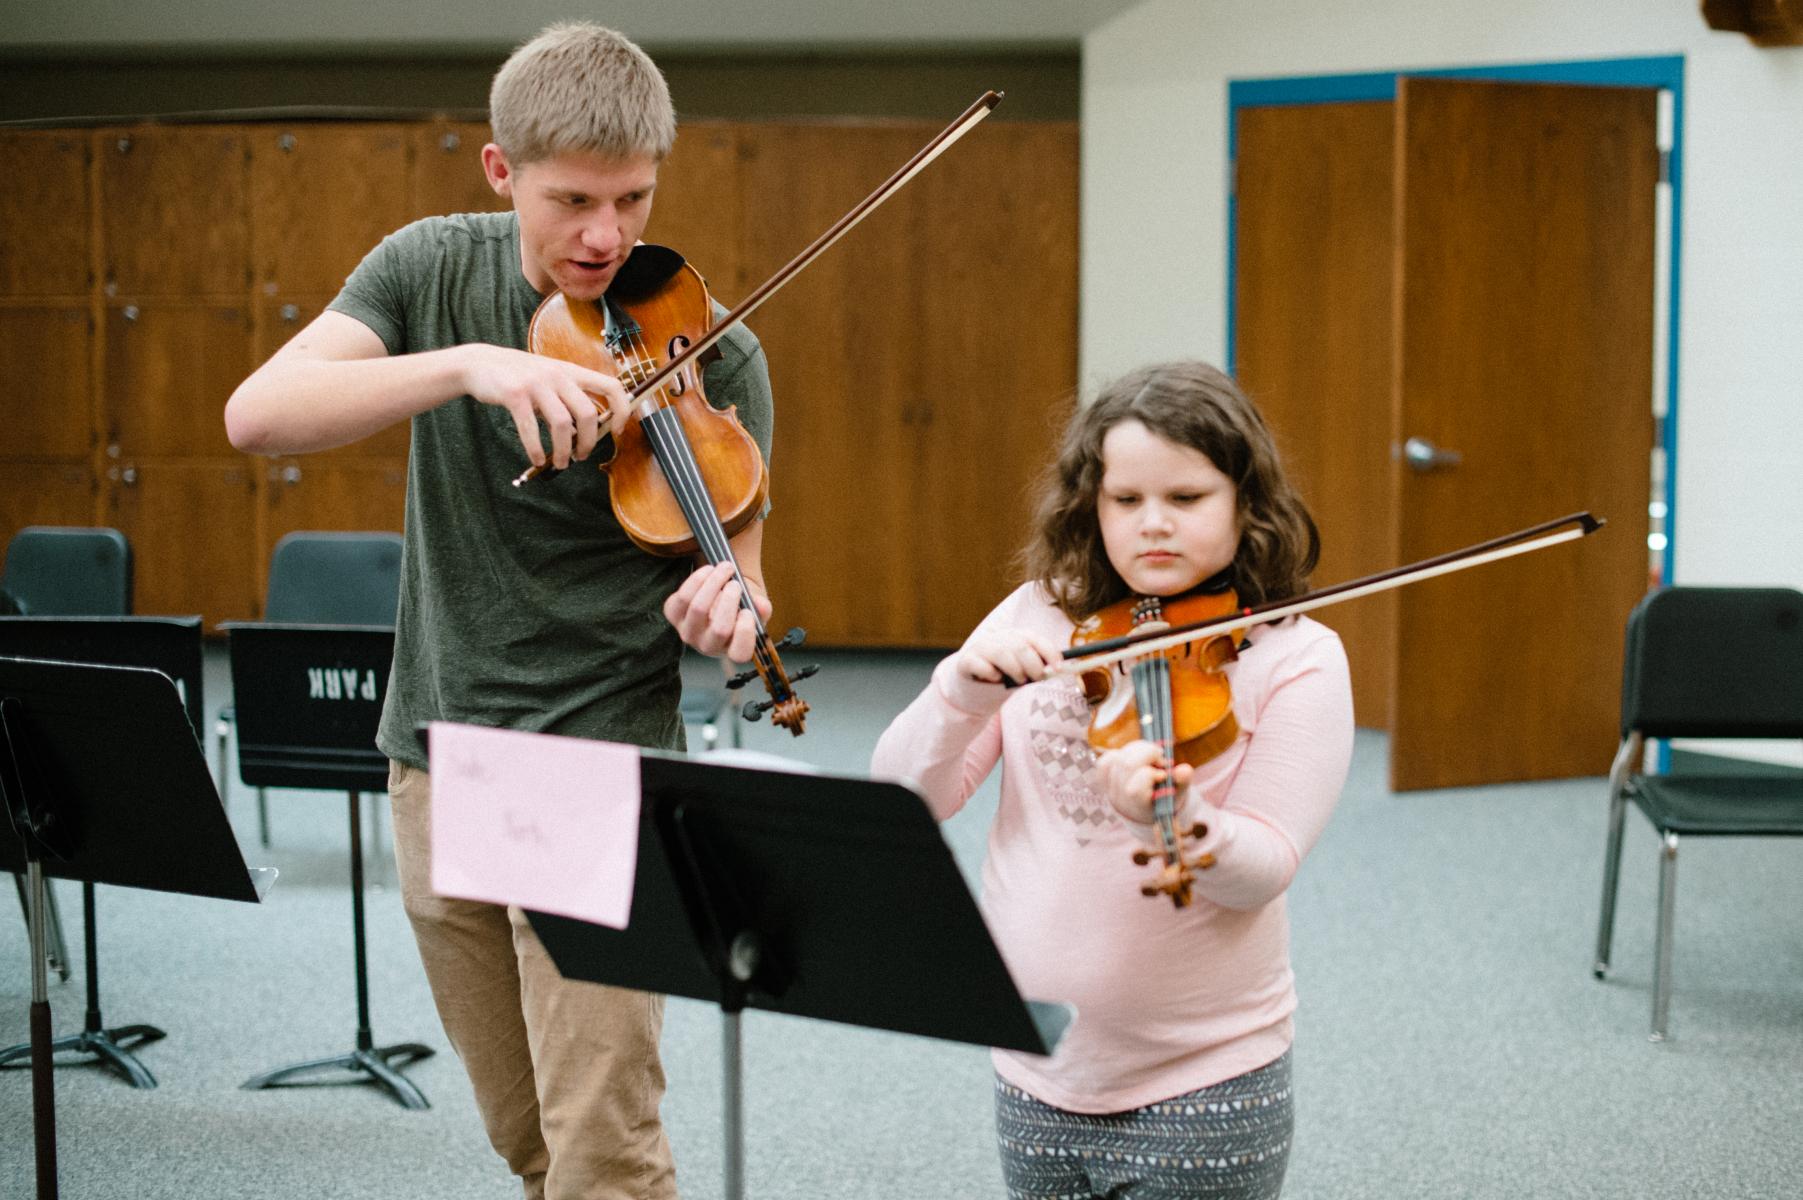 Undergraduate Student teacher plays a duet with a string project